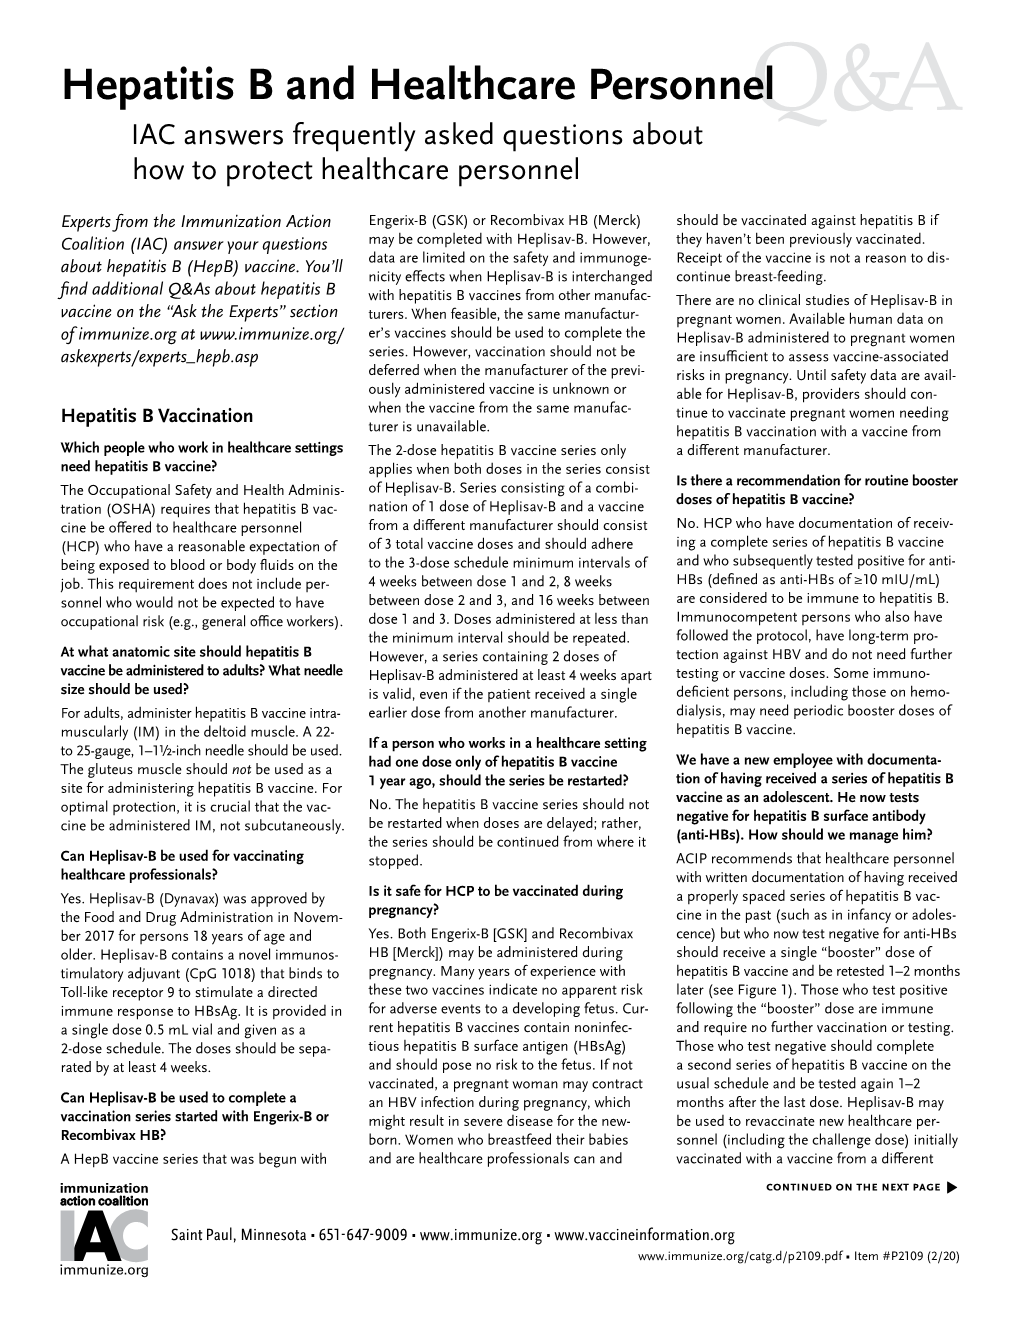 Hepatitis B and Healthcare Personnelq &A IAC Answers Frequently Asked Questions About How to Protect Healthcare Personnel